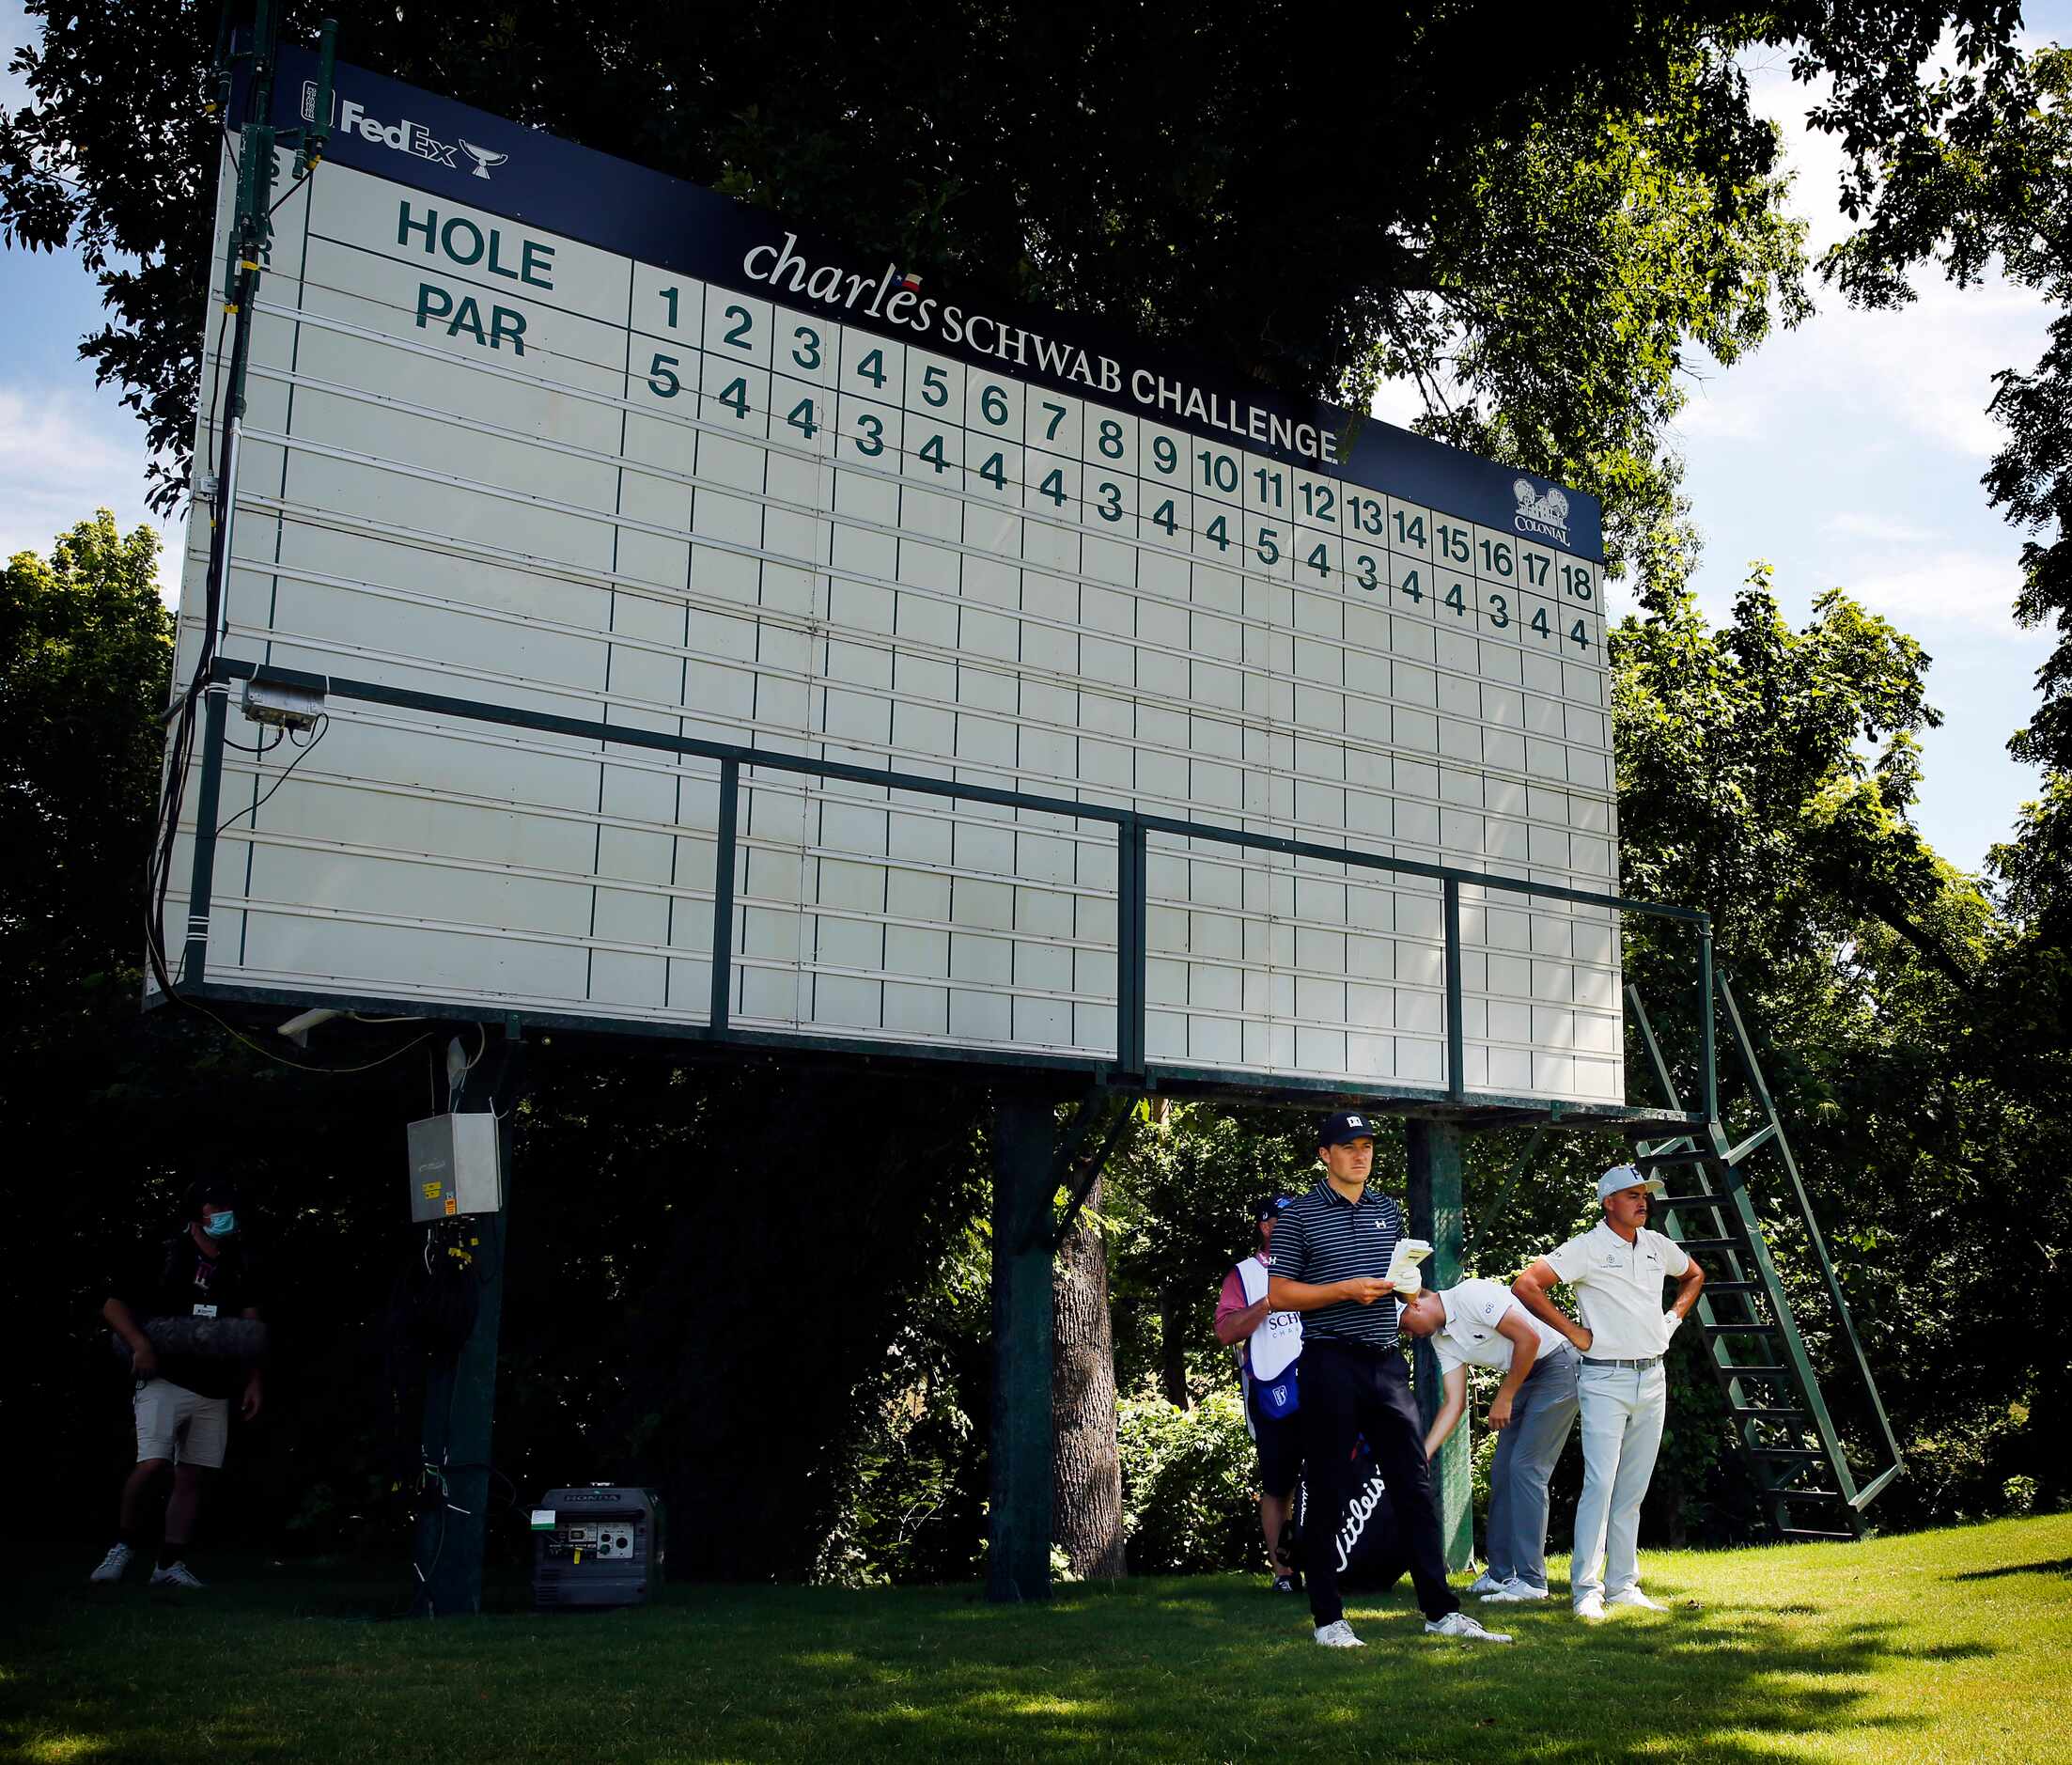 PGA Tour golfers Jordan Spieth (left) and Rickie Fowler takes relief from the sun before an...